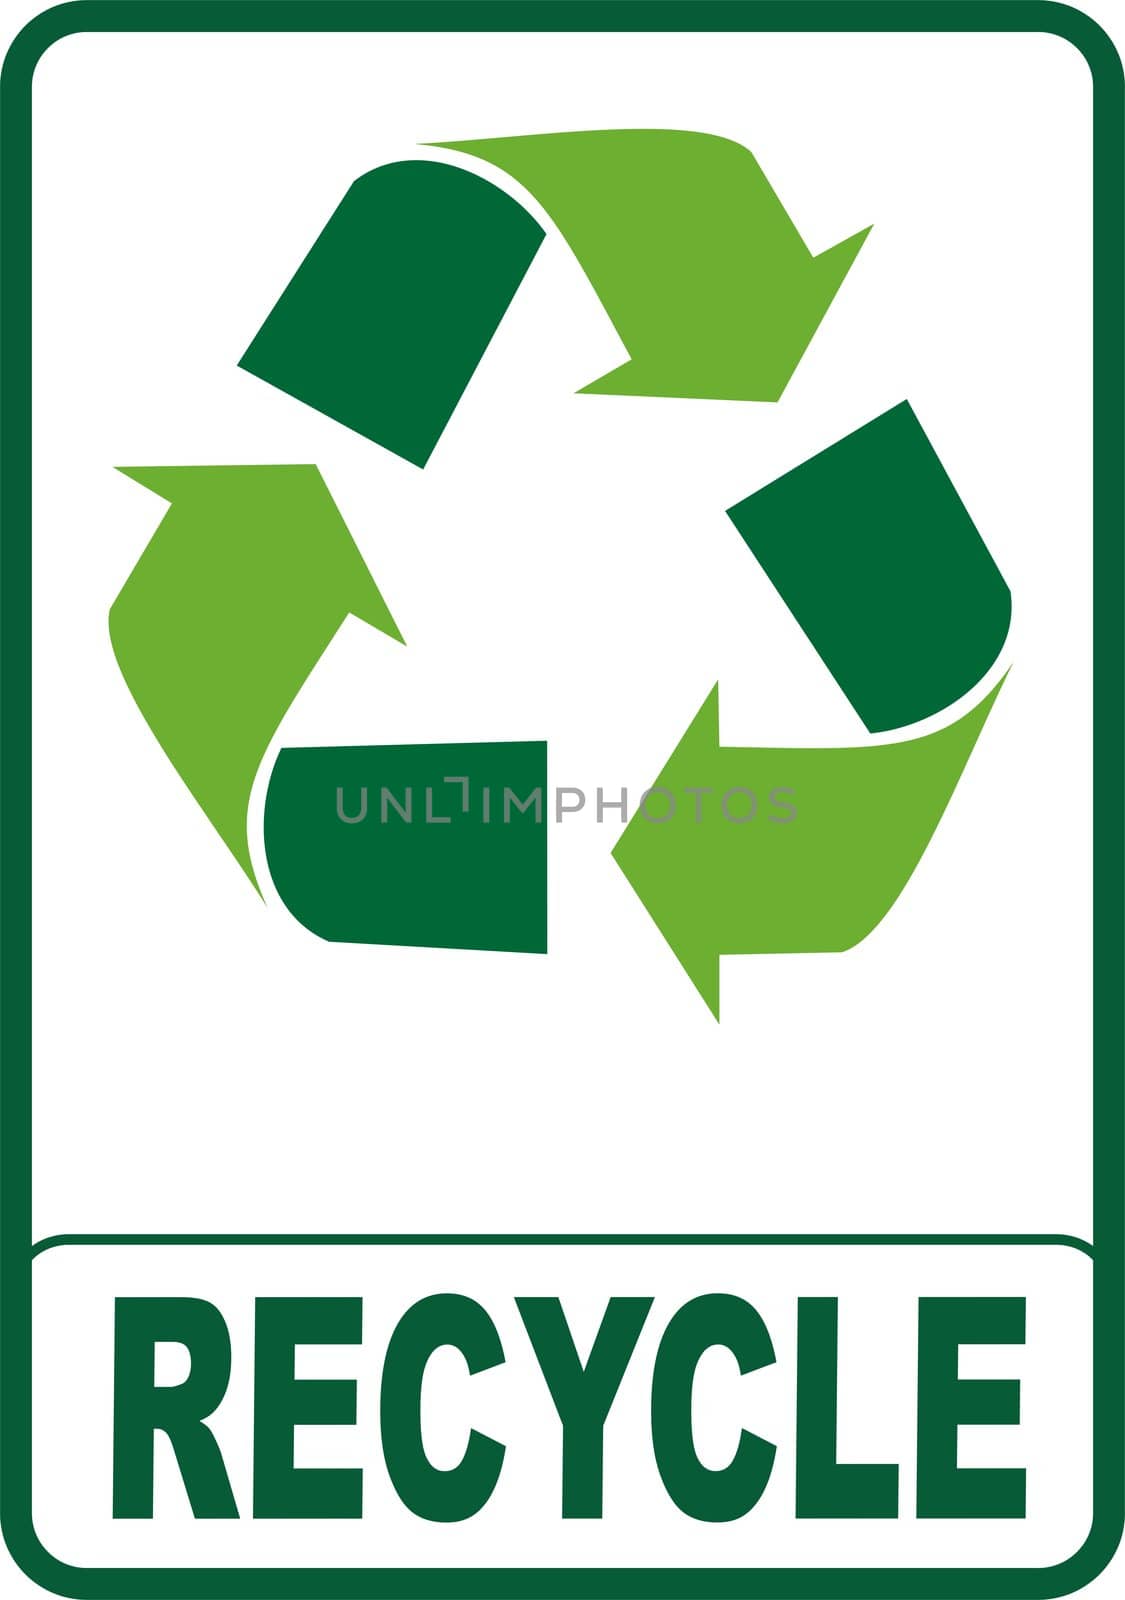 Recycle symbol isolated with green color on white background